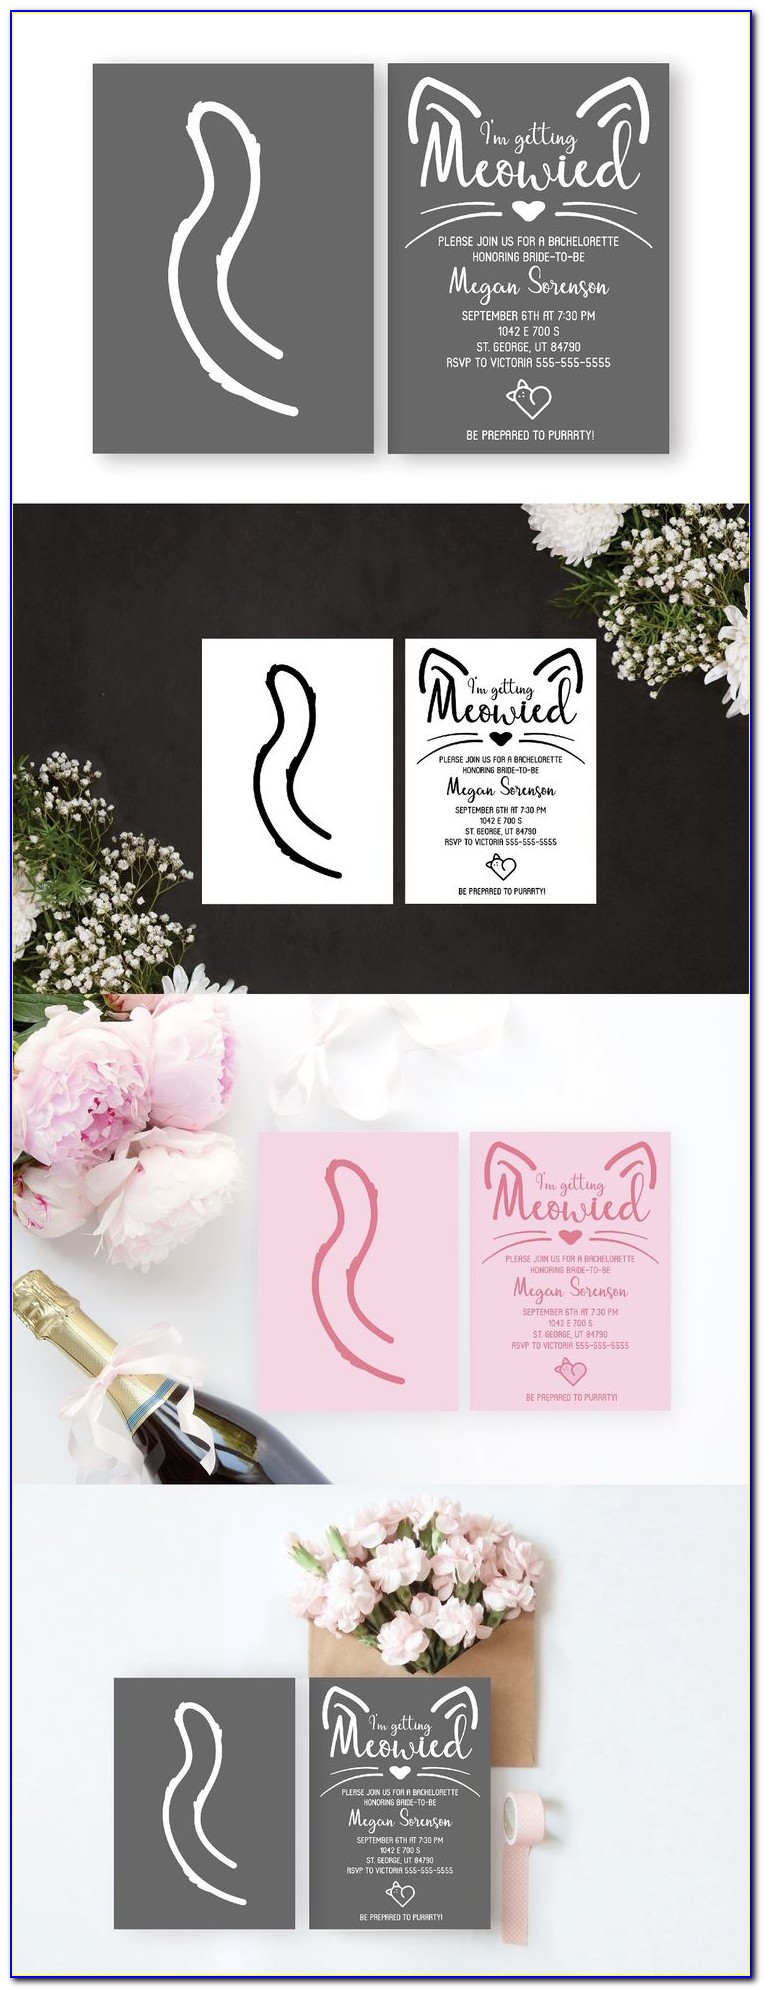 Best Place To Print 5x7 Invitations